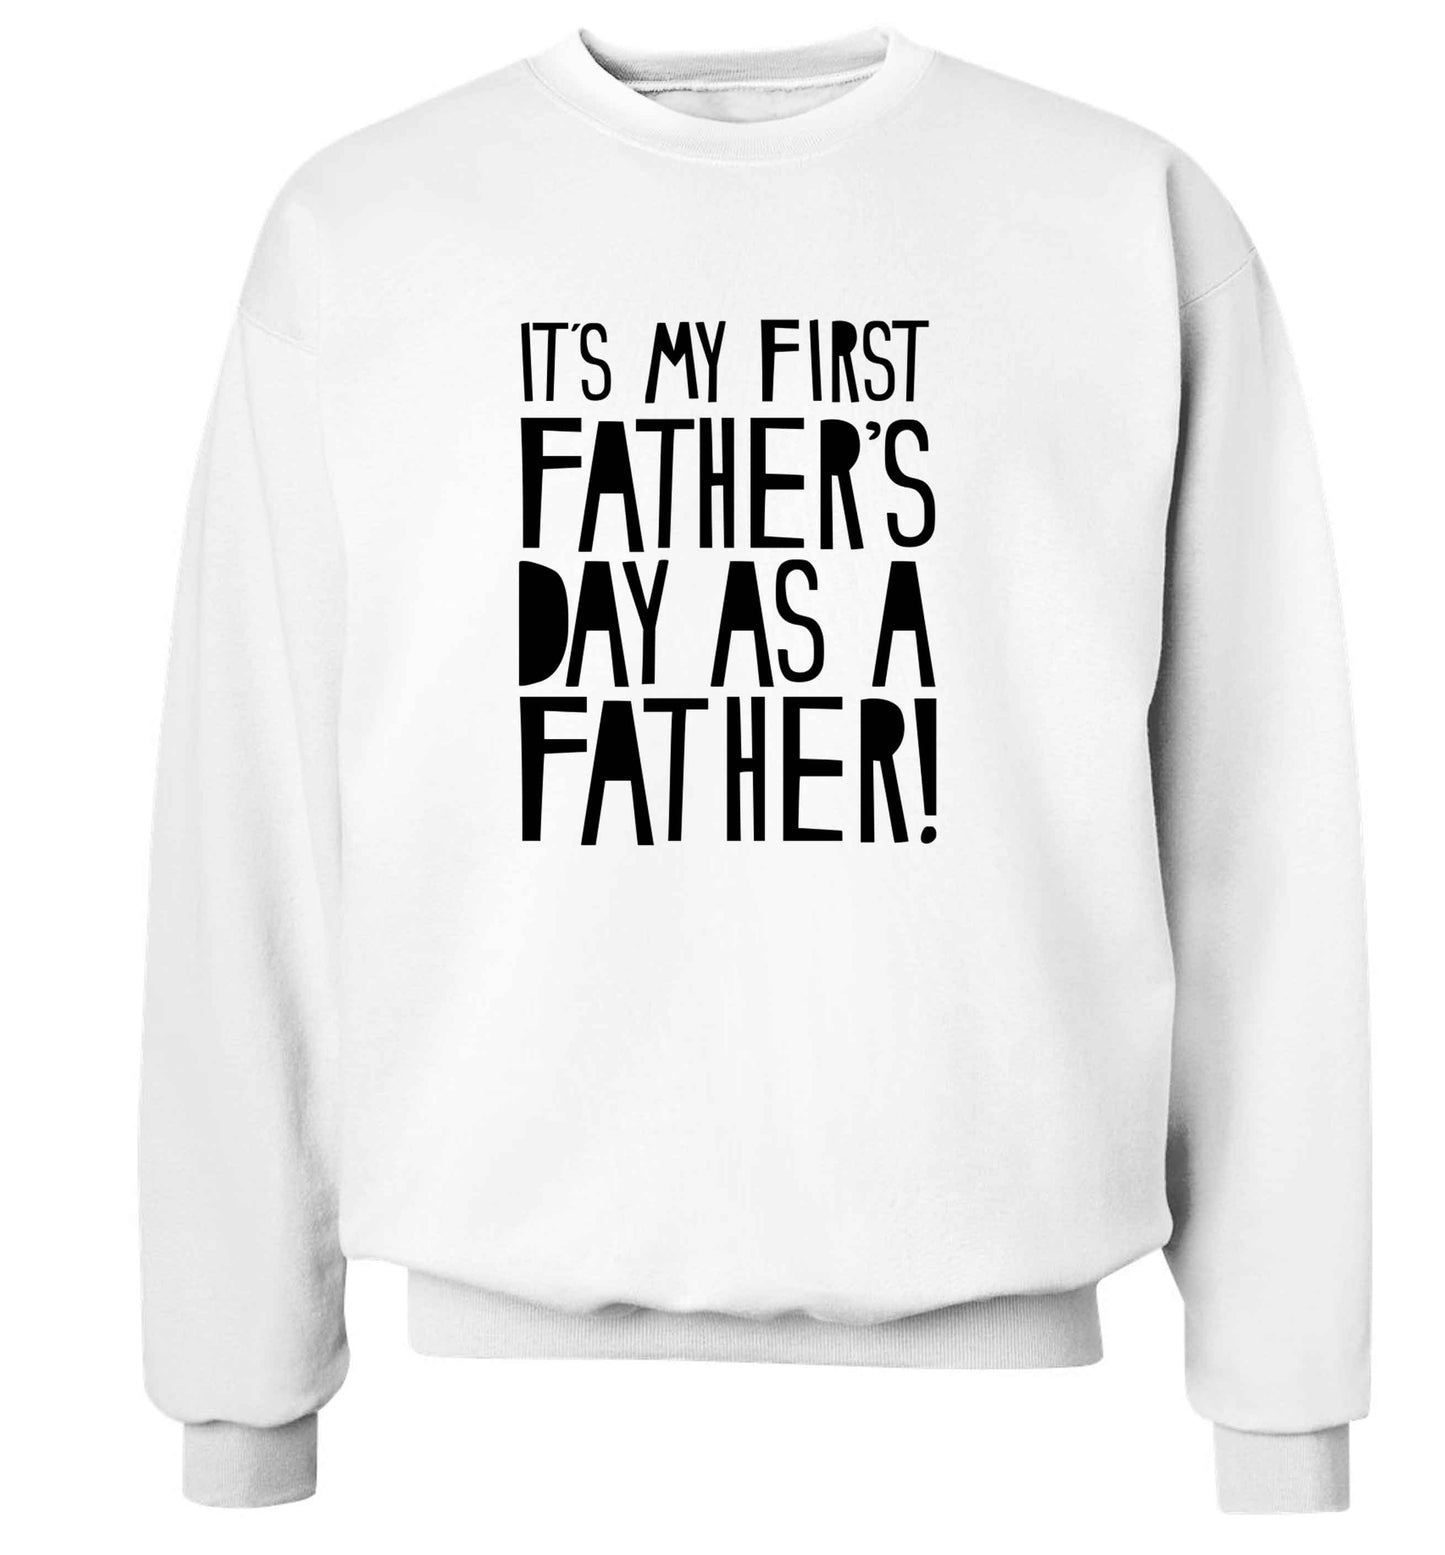 It's my first father's day as a father! adult's unisex white sweater 2XL